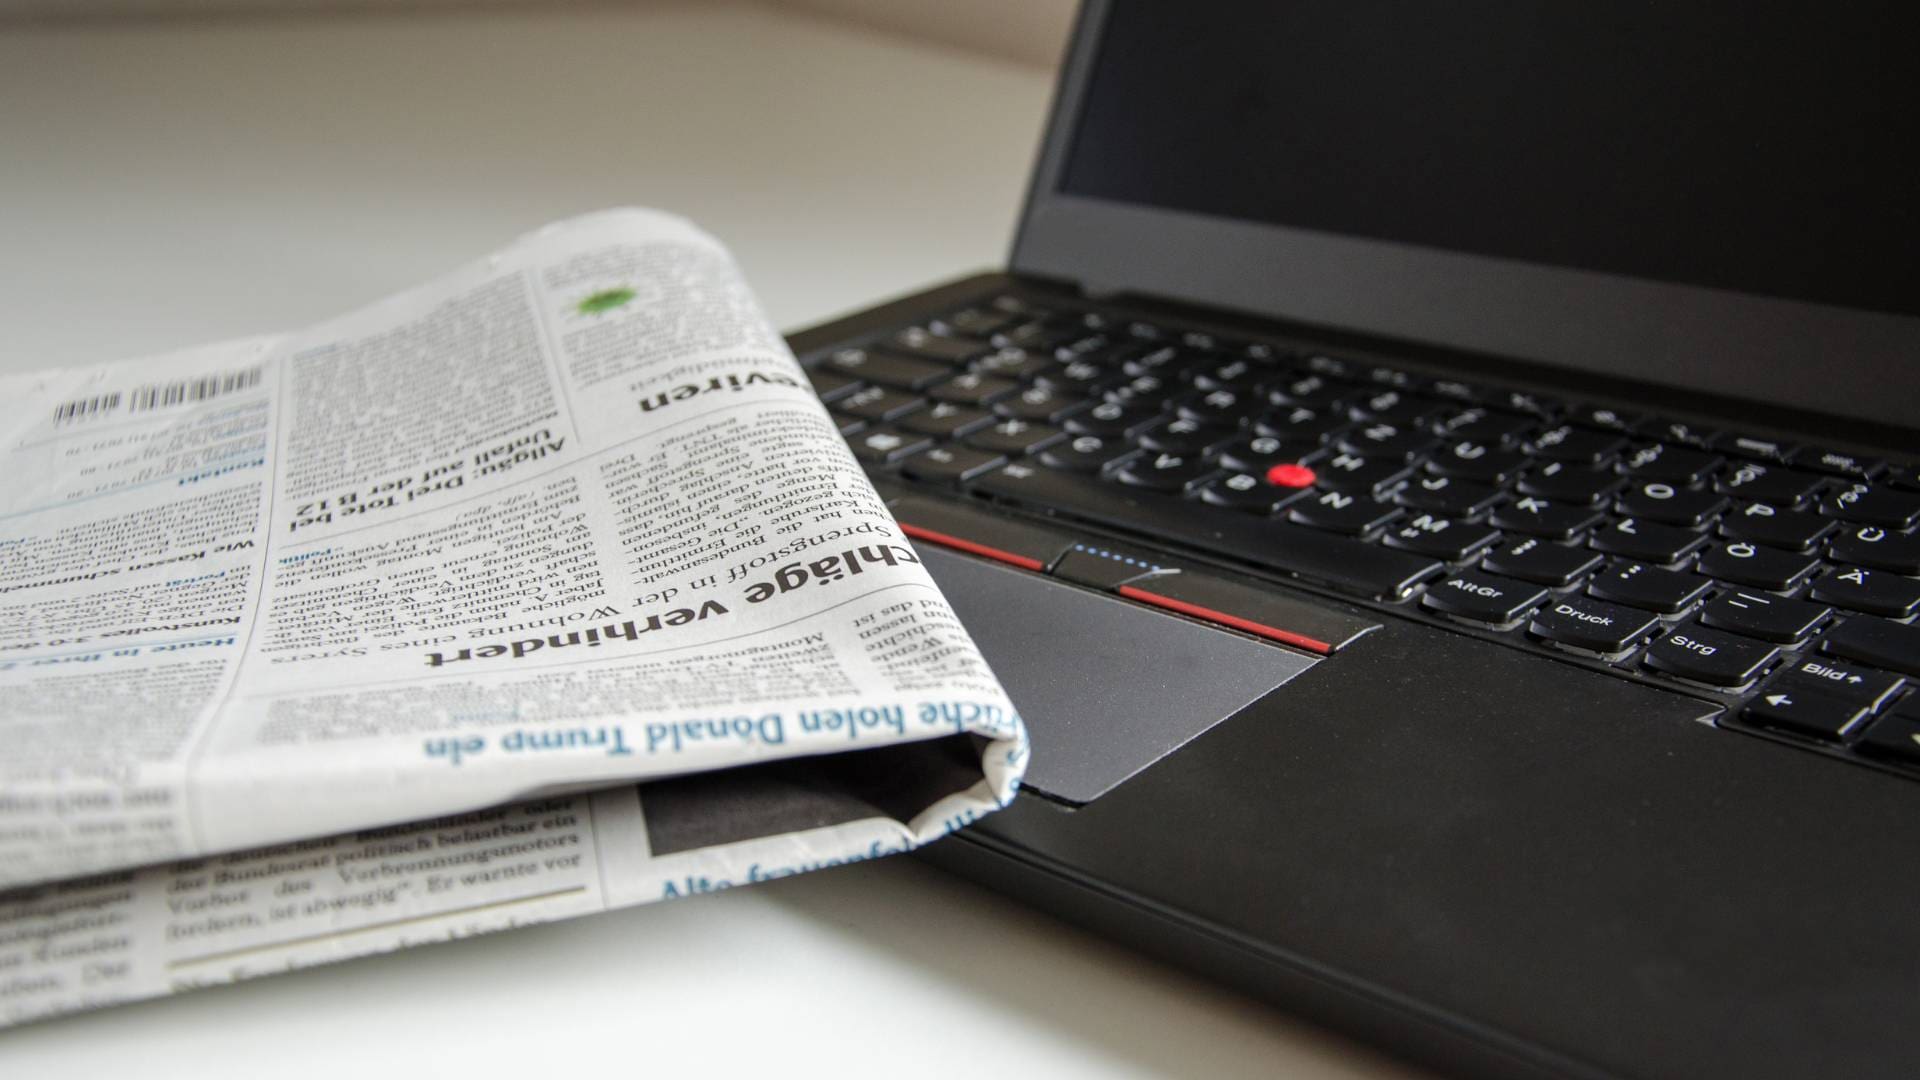 An open black laptop with a folded newspaper placed on top